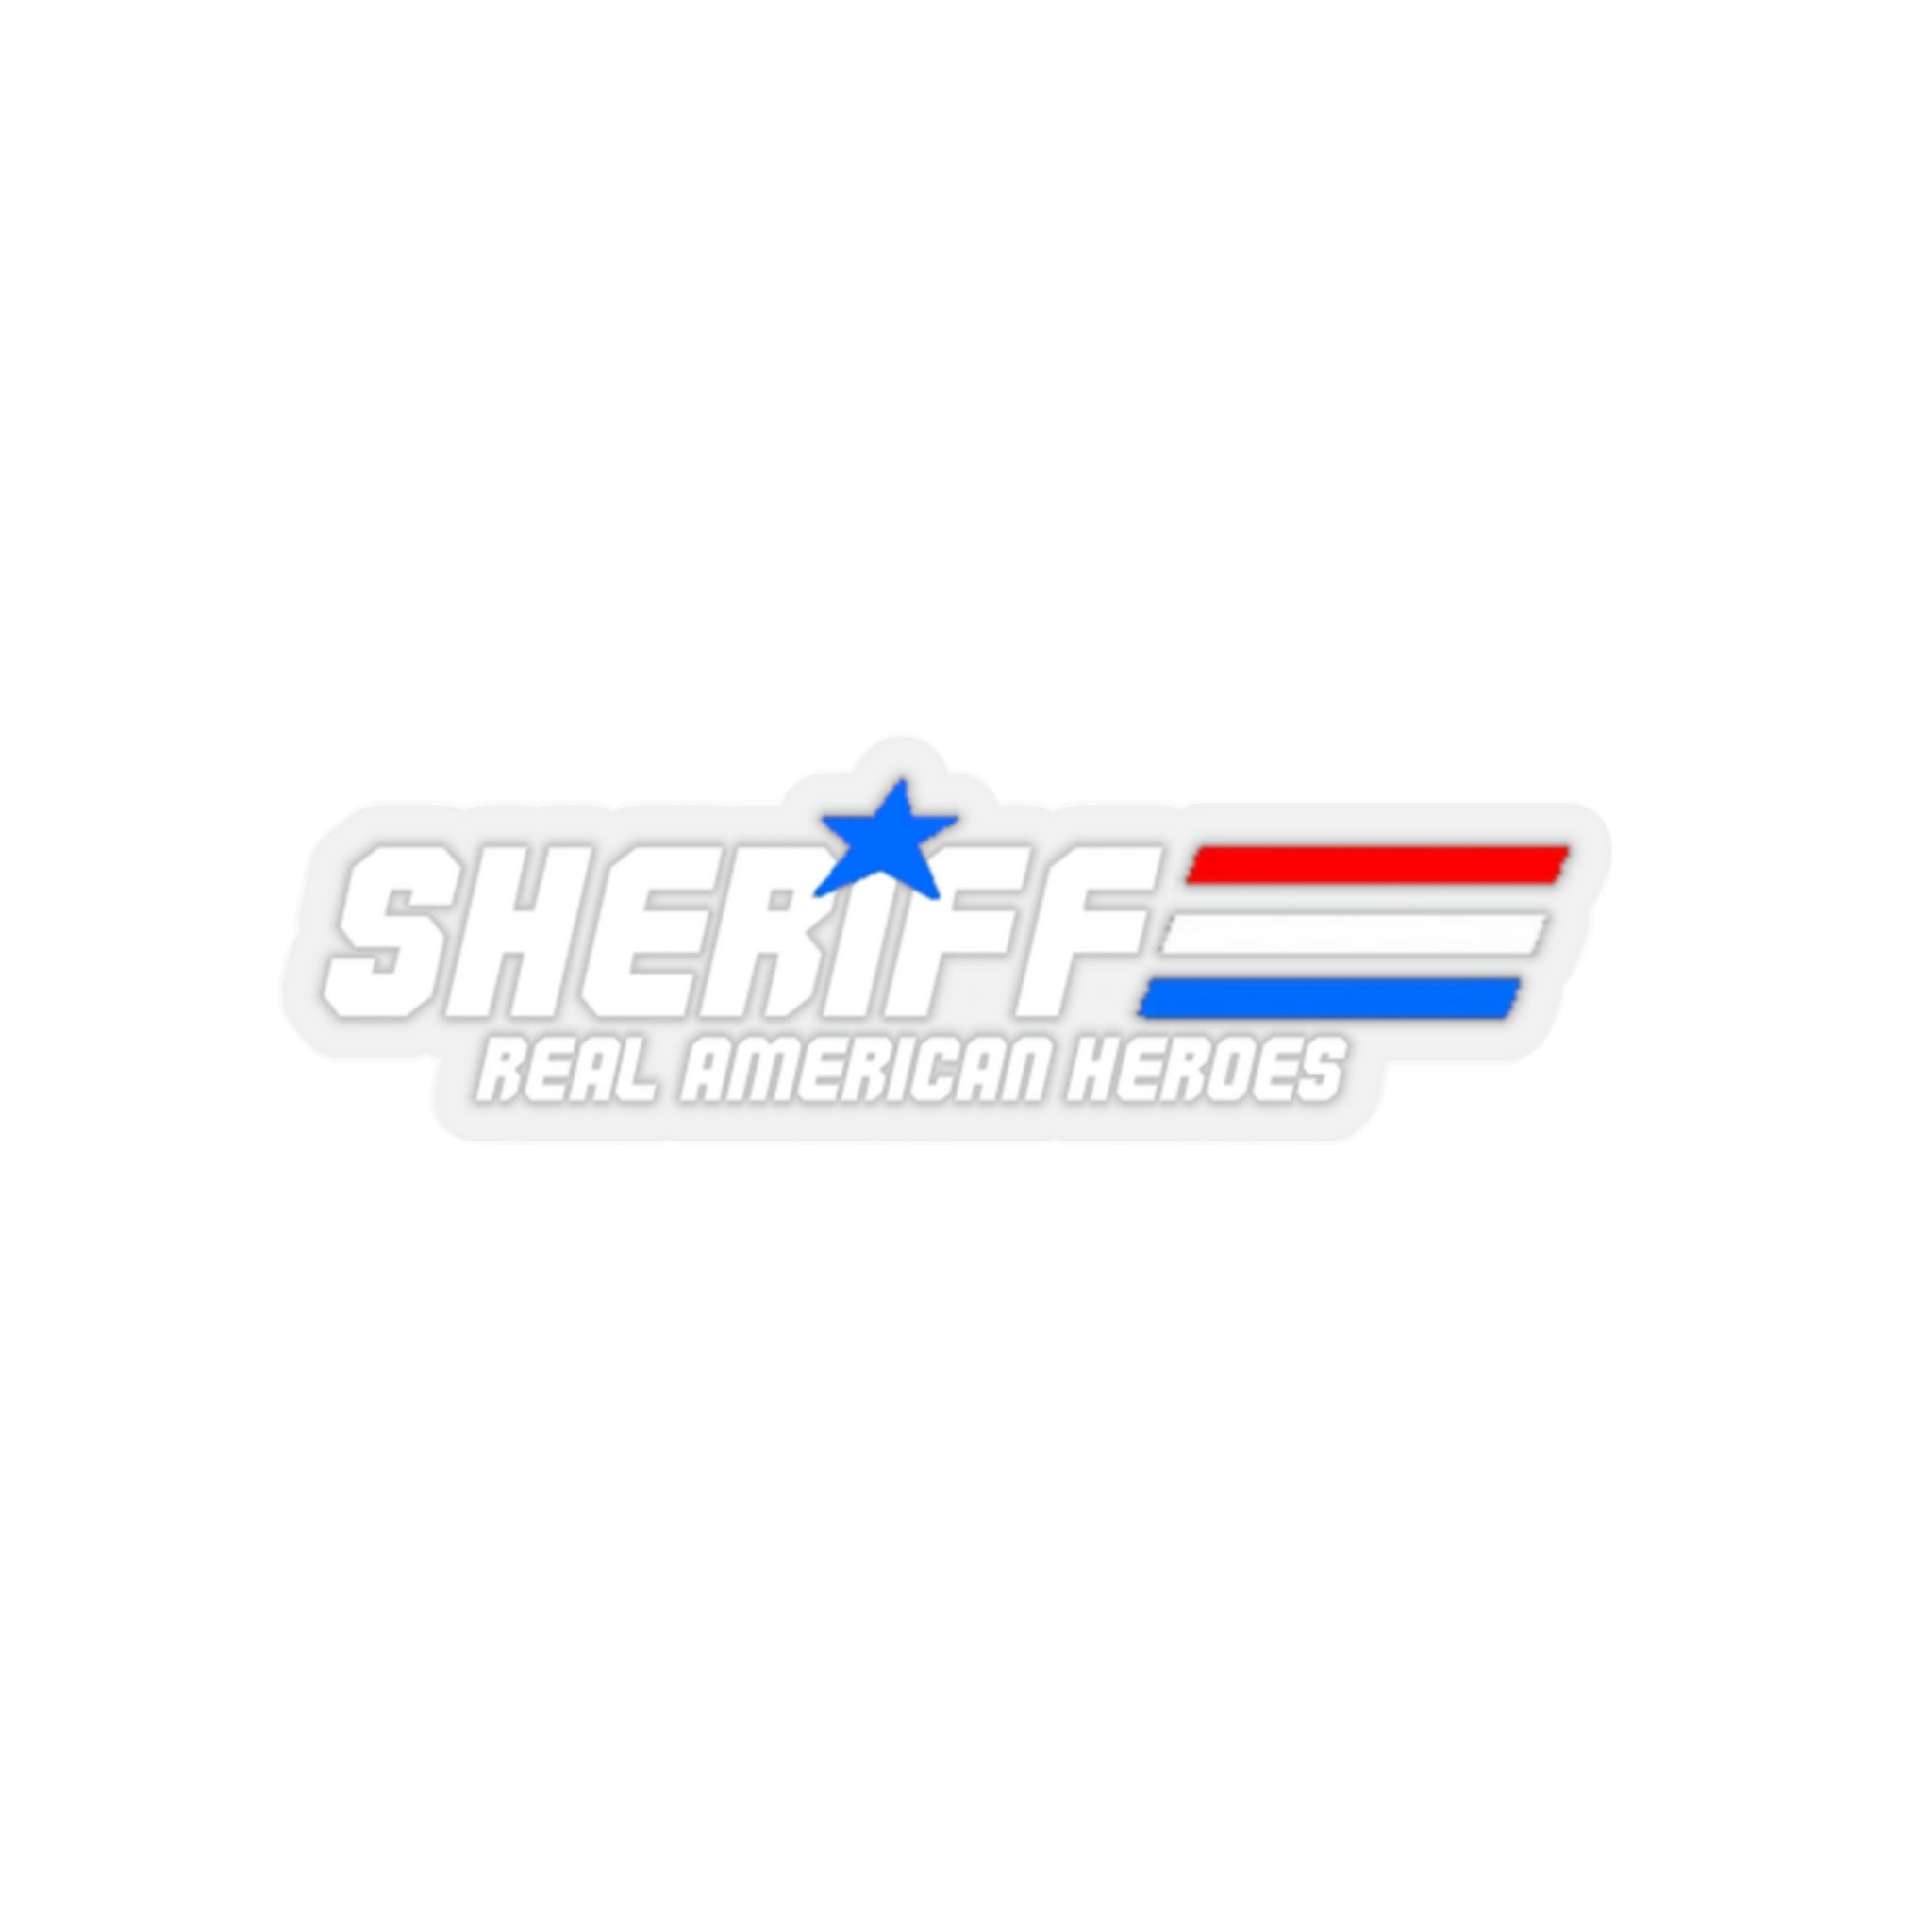 Kiss-Cut Stickers - Sheriff "Real American Heroes"